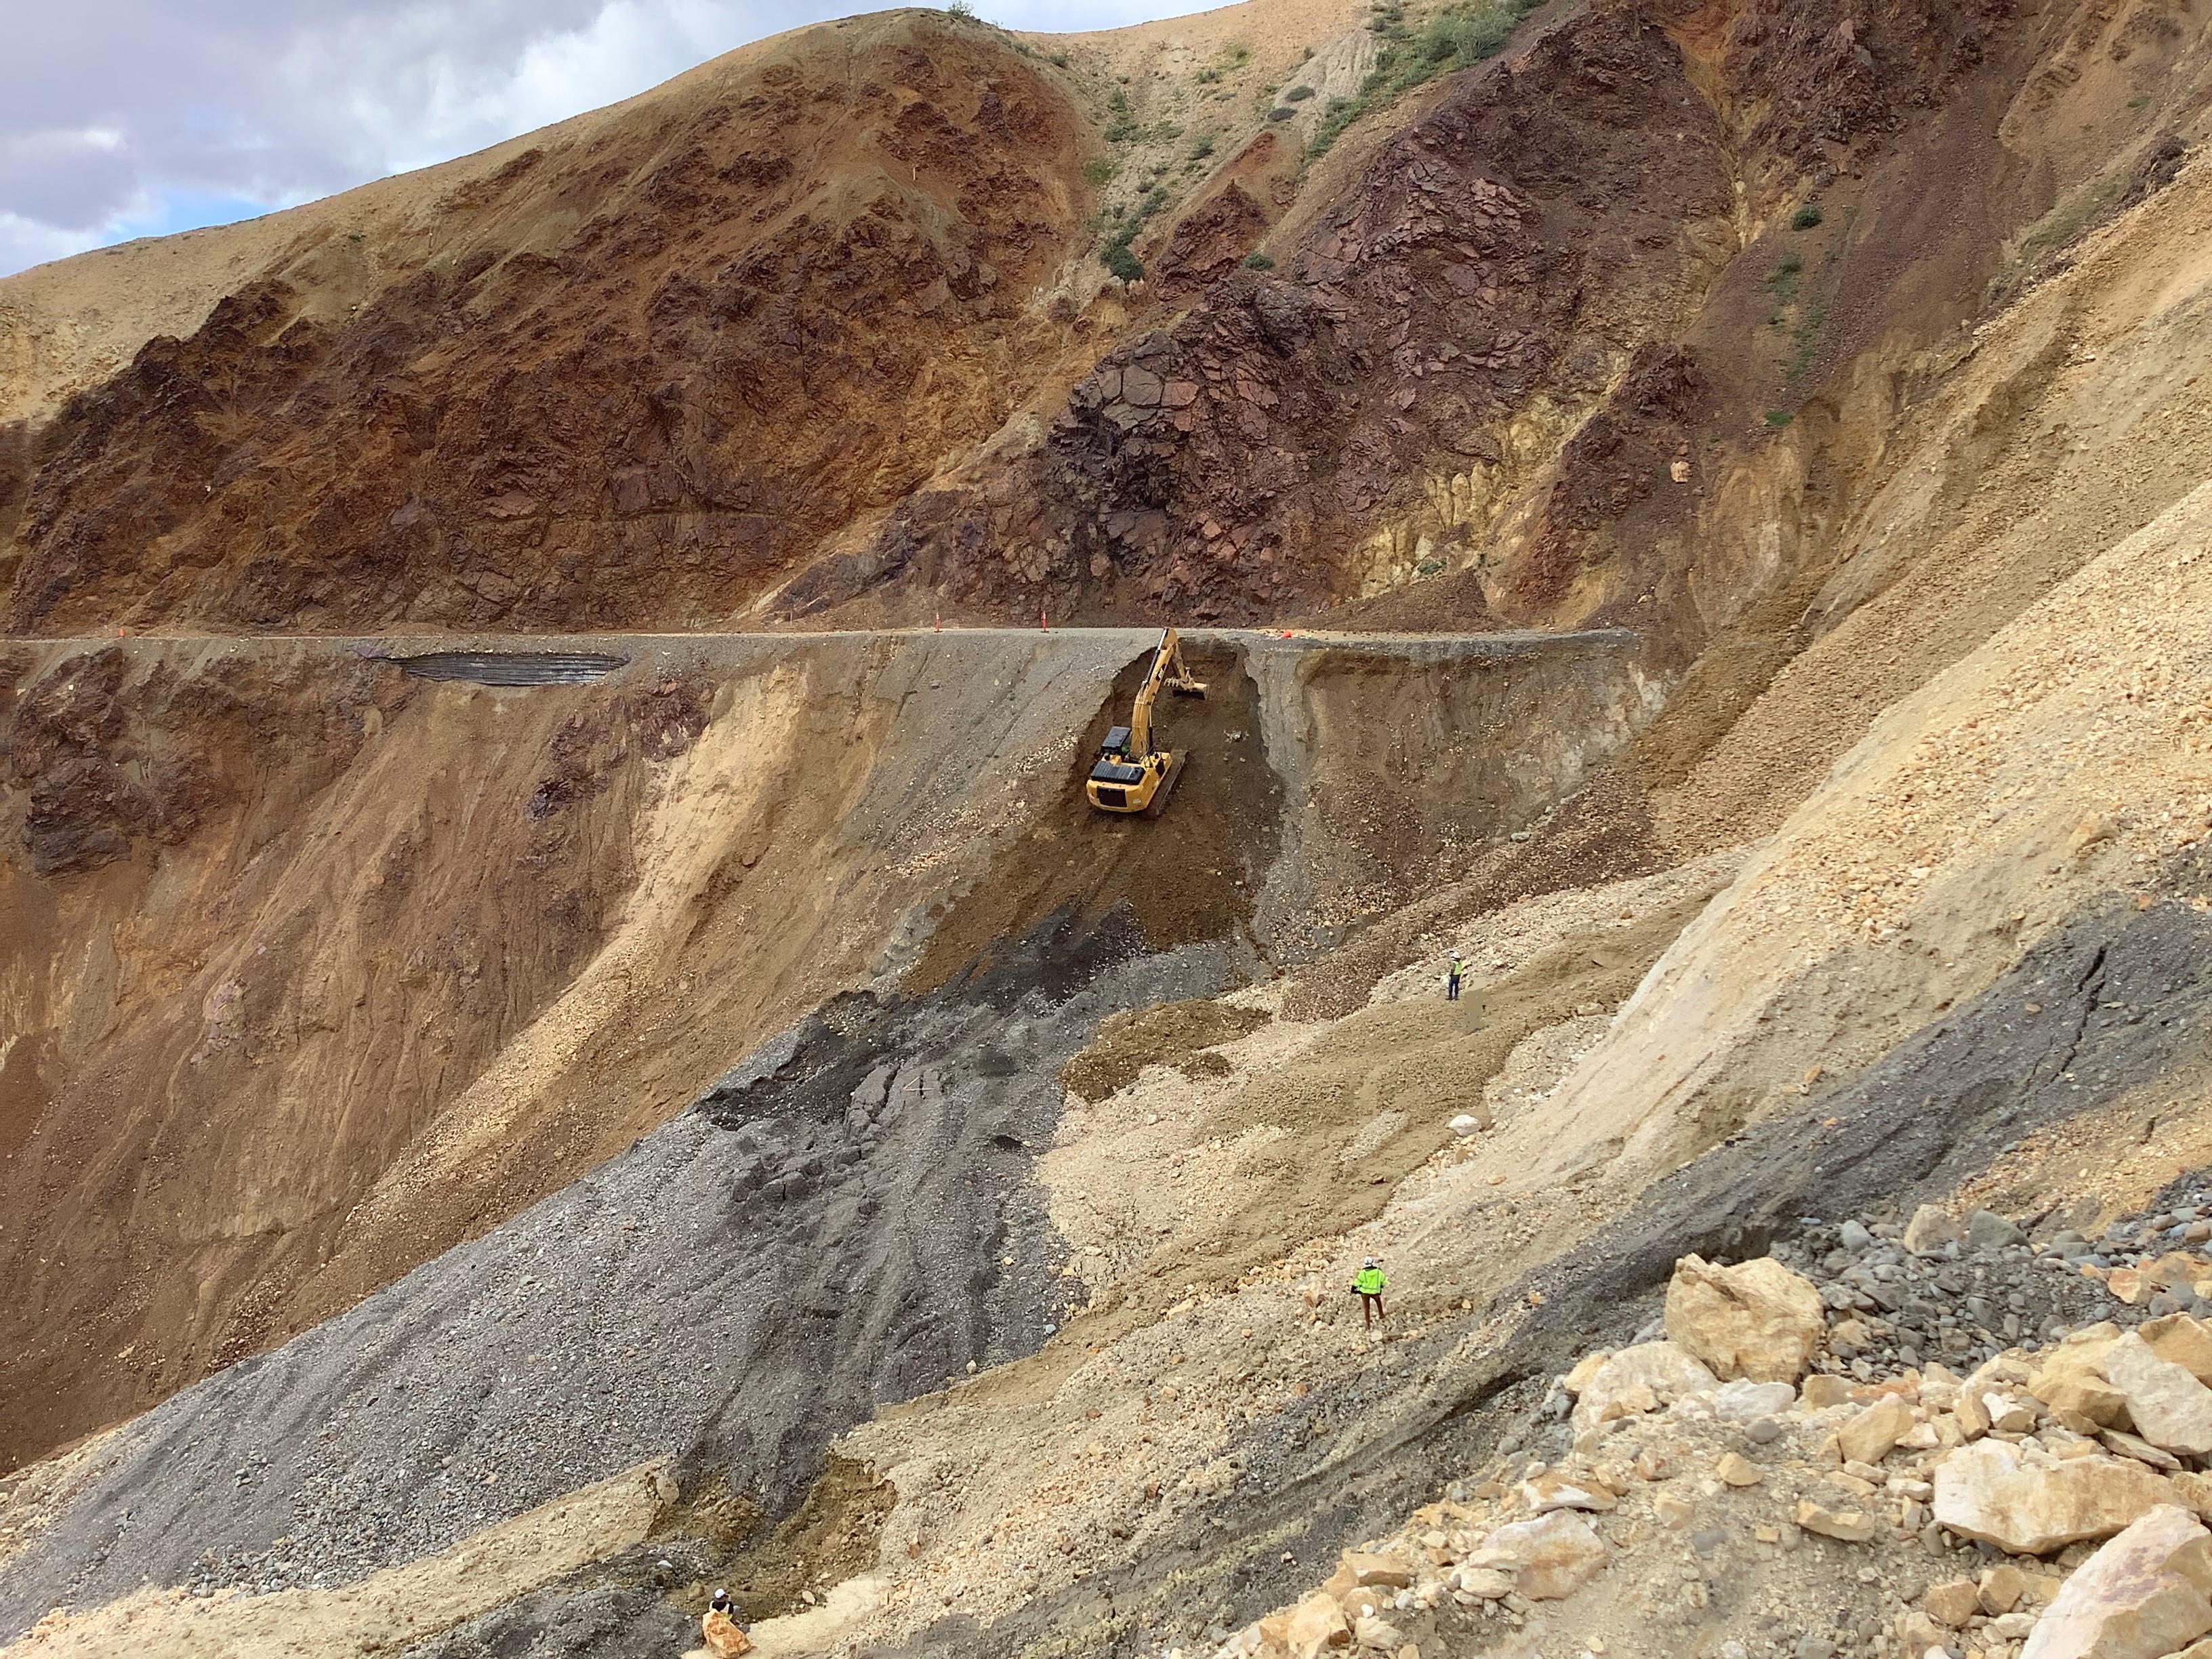 An excavator climbs up a steep slope to the flat road on the far side of the Pretty Rocks landslide. Two people in safety vests observe.